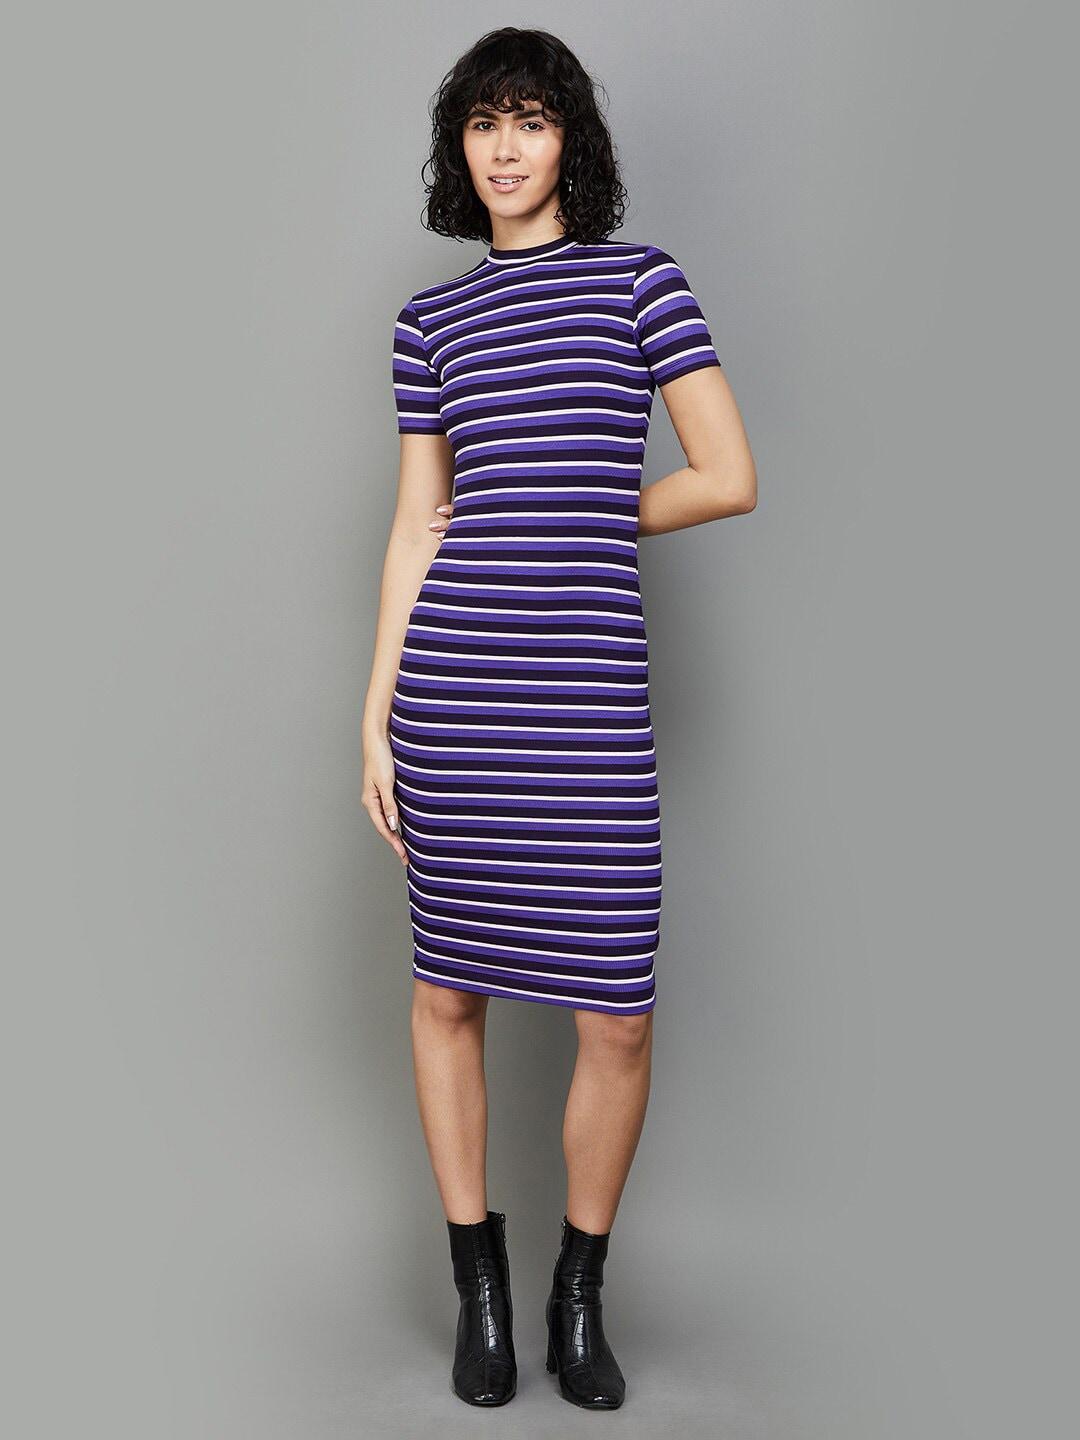 ginger-by-lifestyle-striped-high-collar-sheath-dress